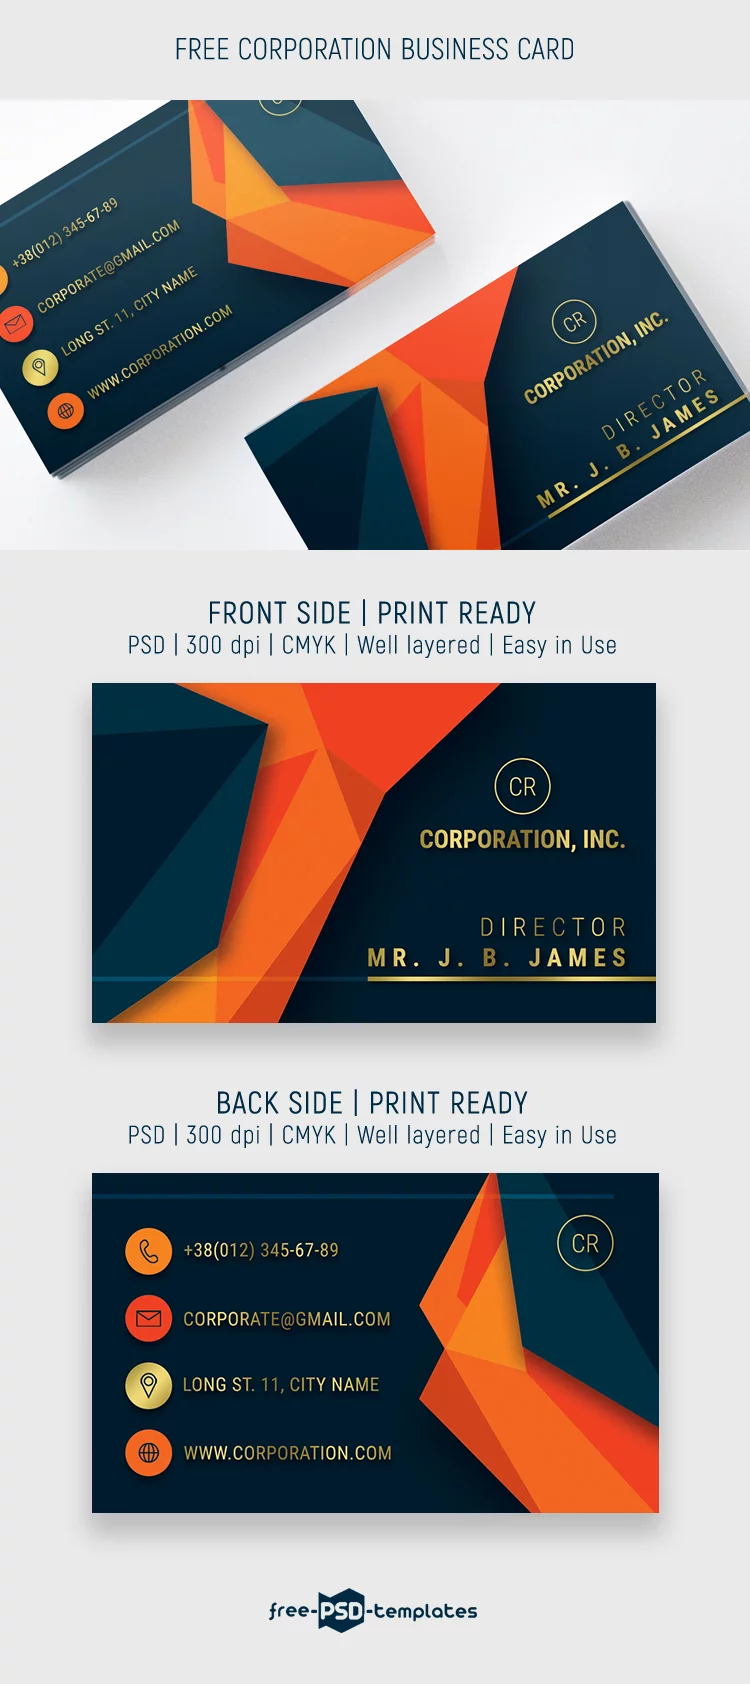 Free Corporation Business Card